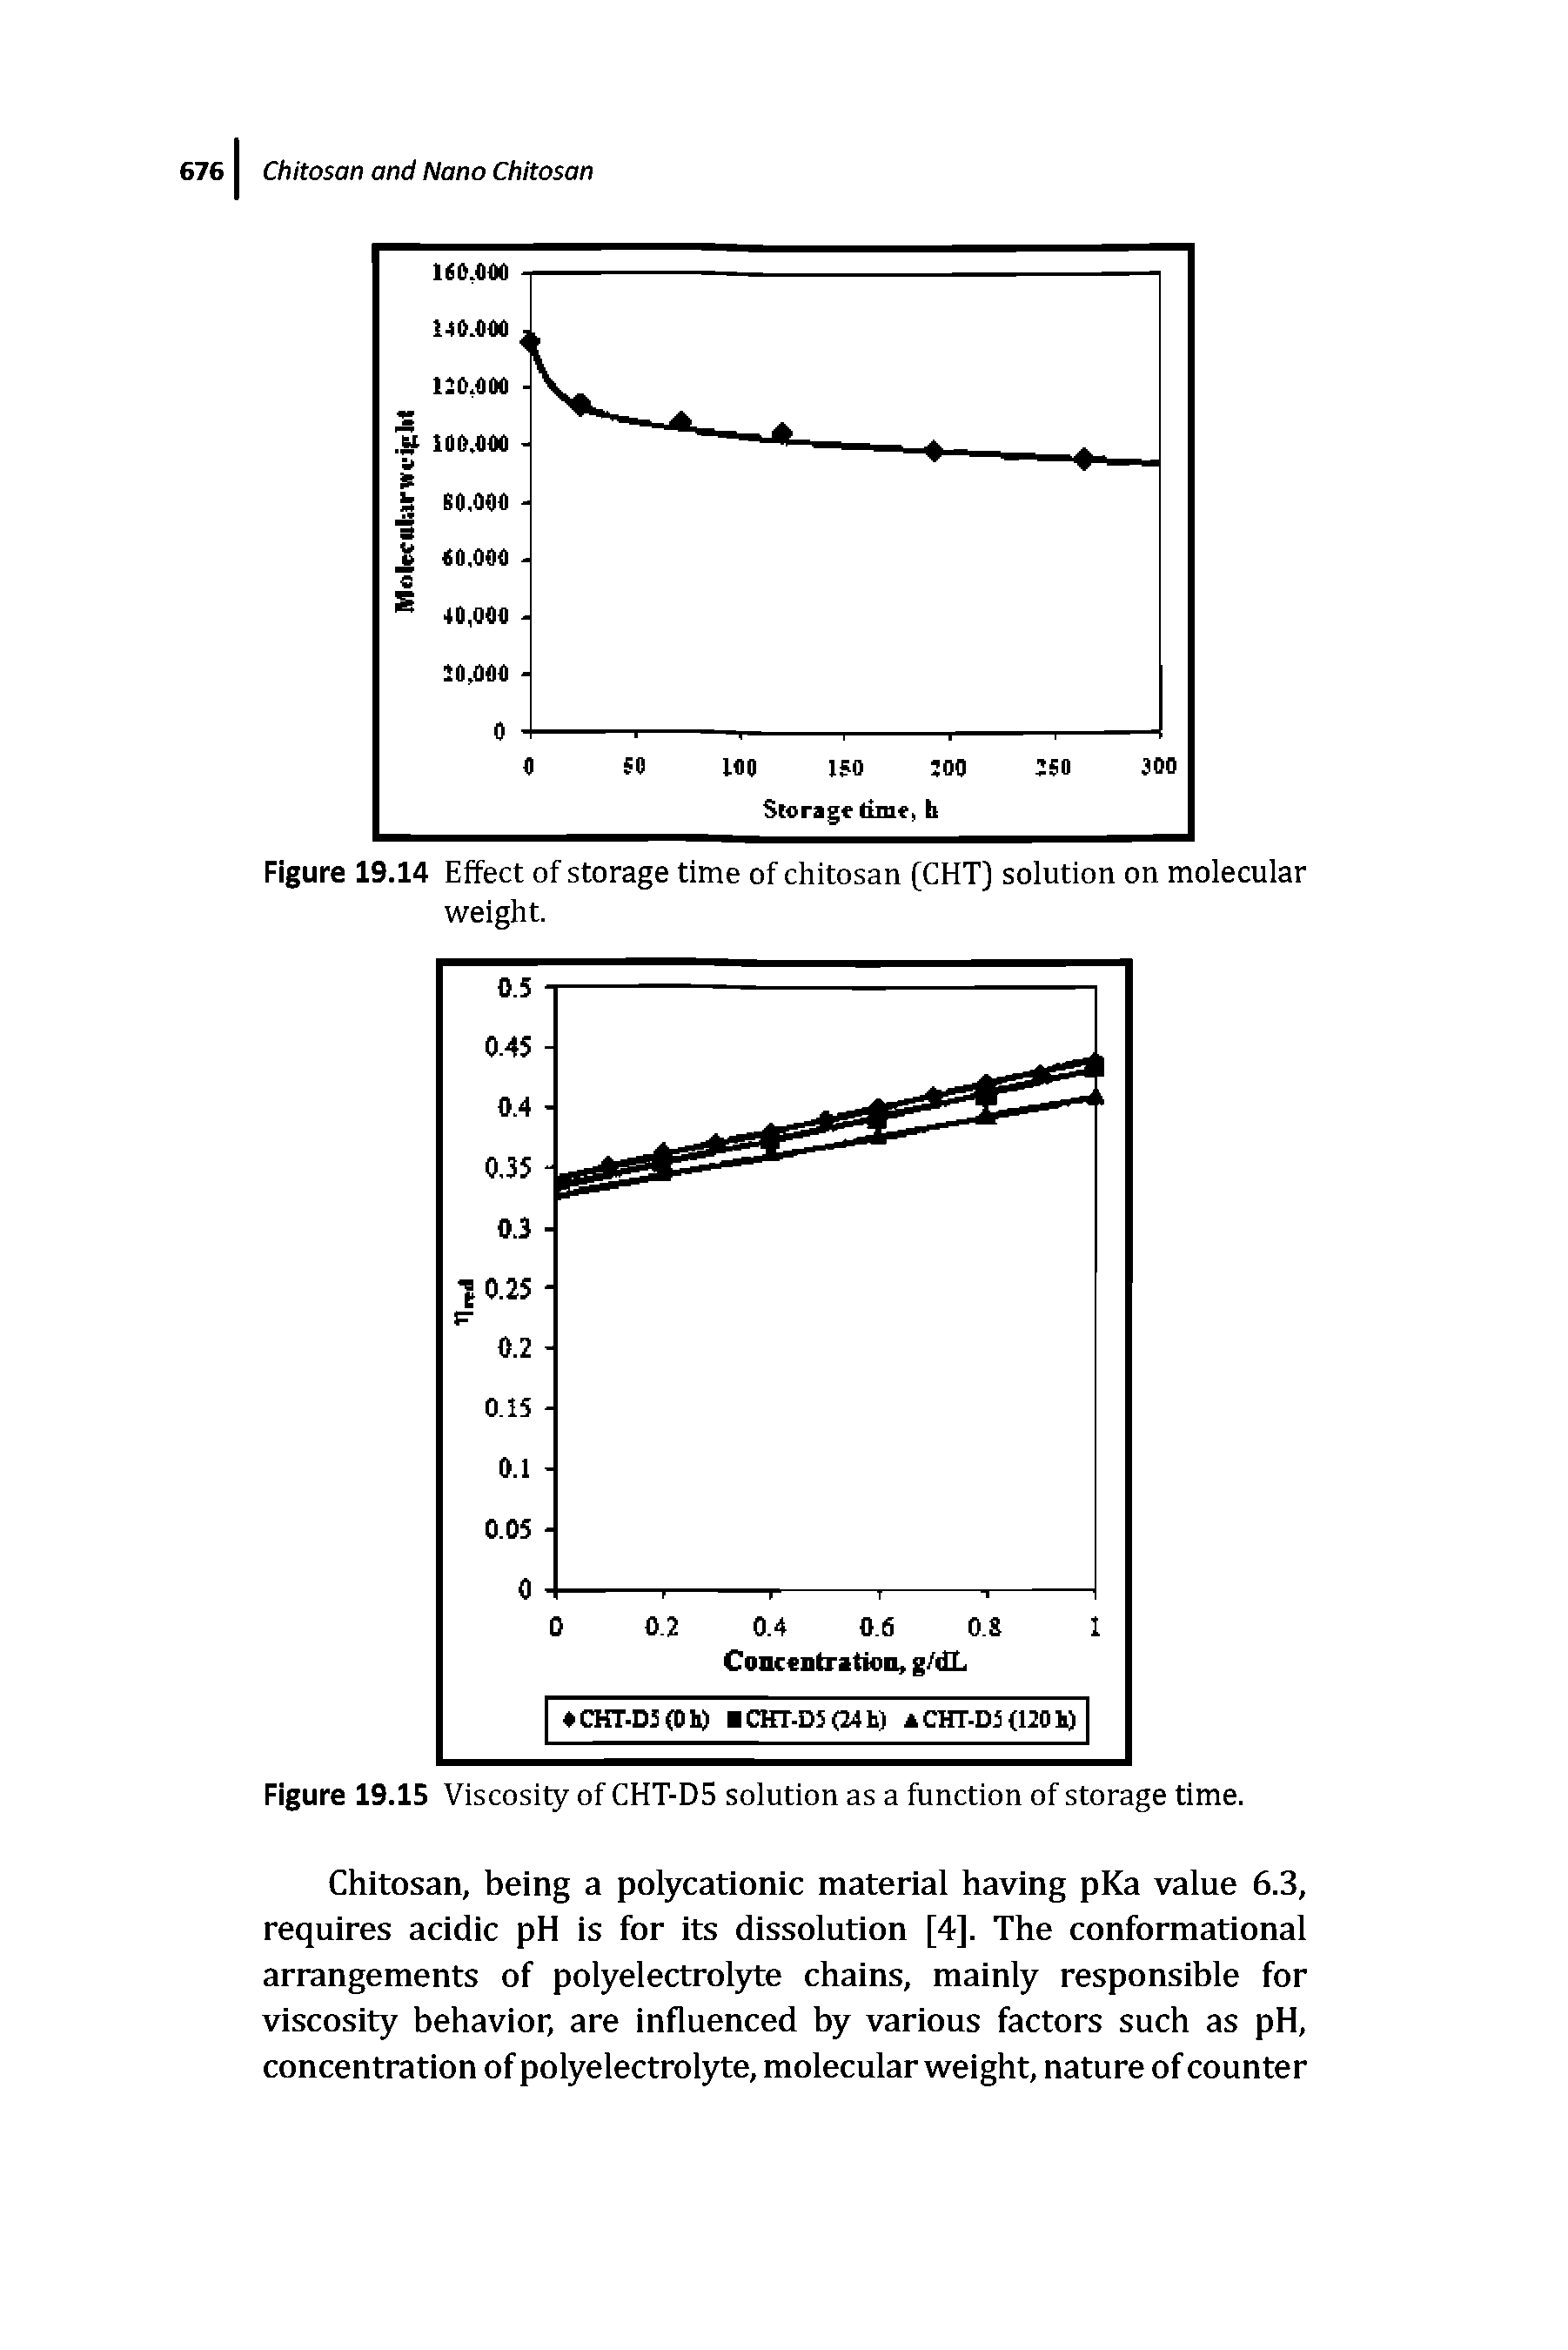 Figure 19.14 Effect of storage time of chitosan (CHT) solution on molecular weight.